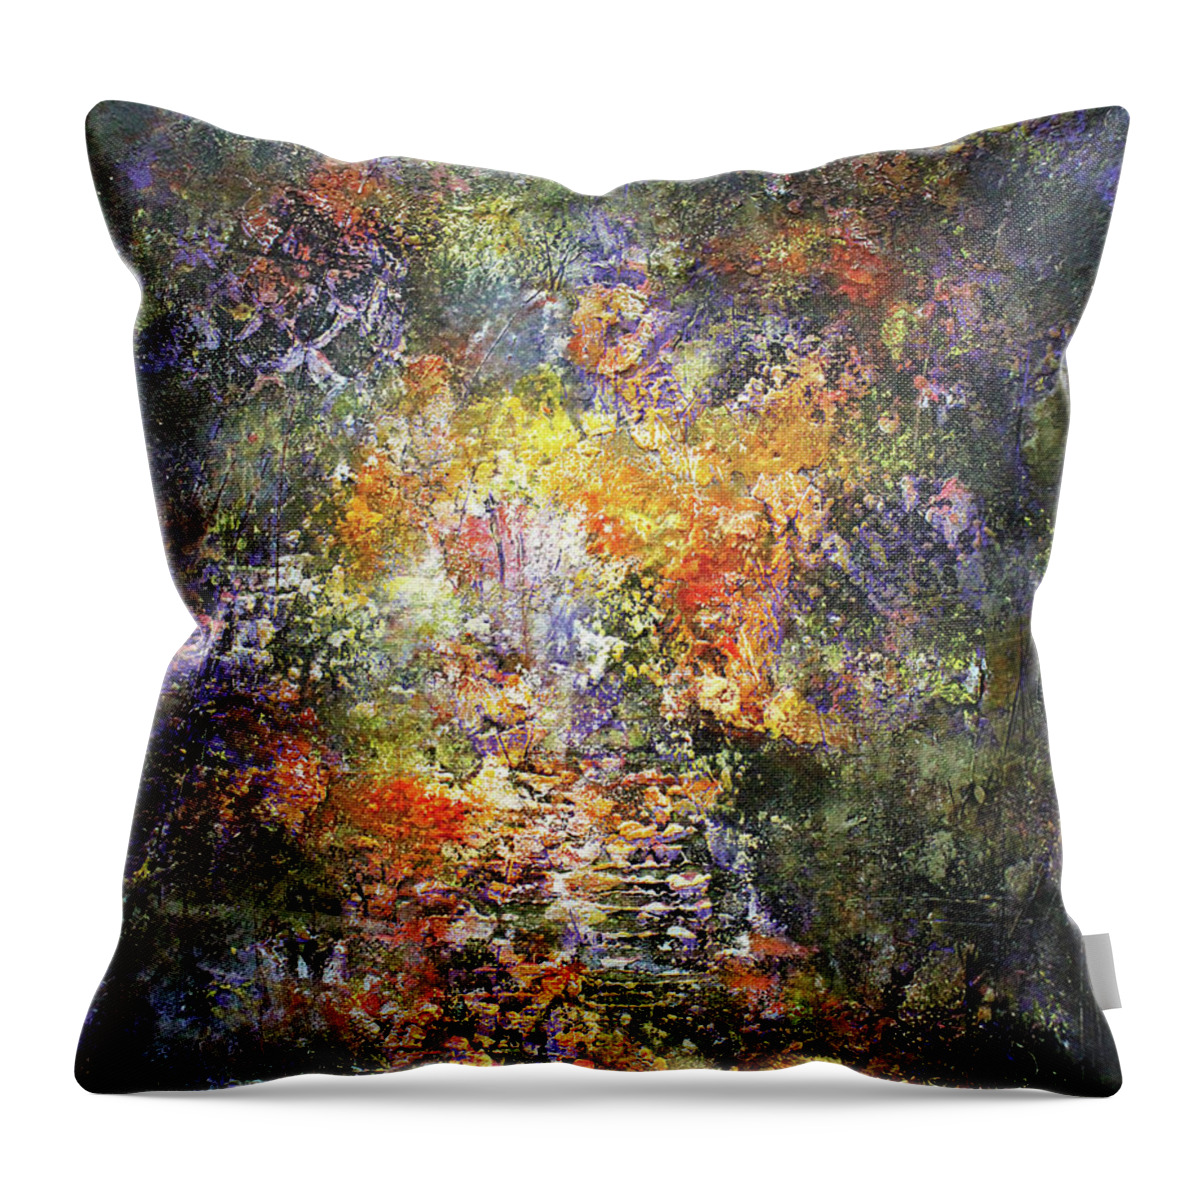 Landscape Throw Pillow featuring the painting The Entrance by Patricia Lintner